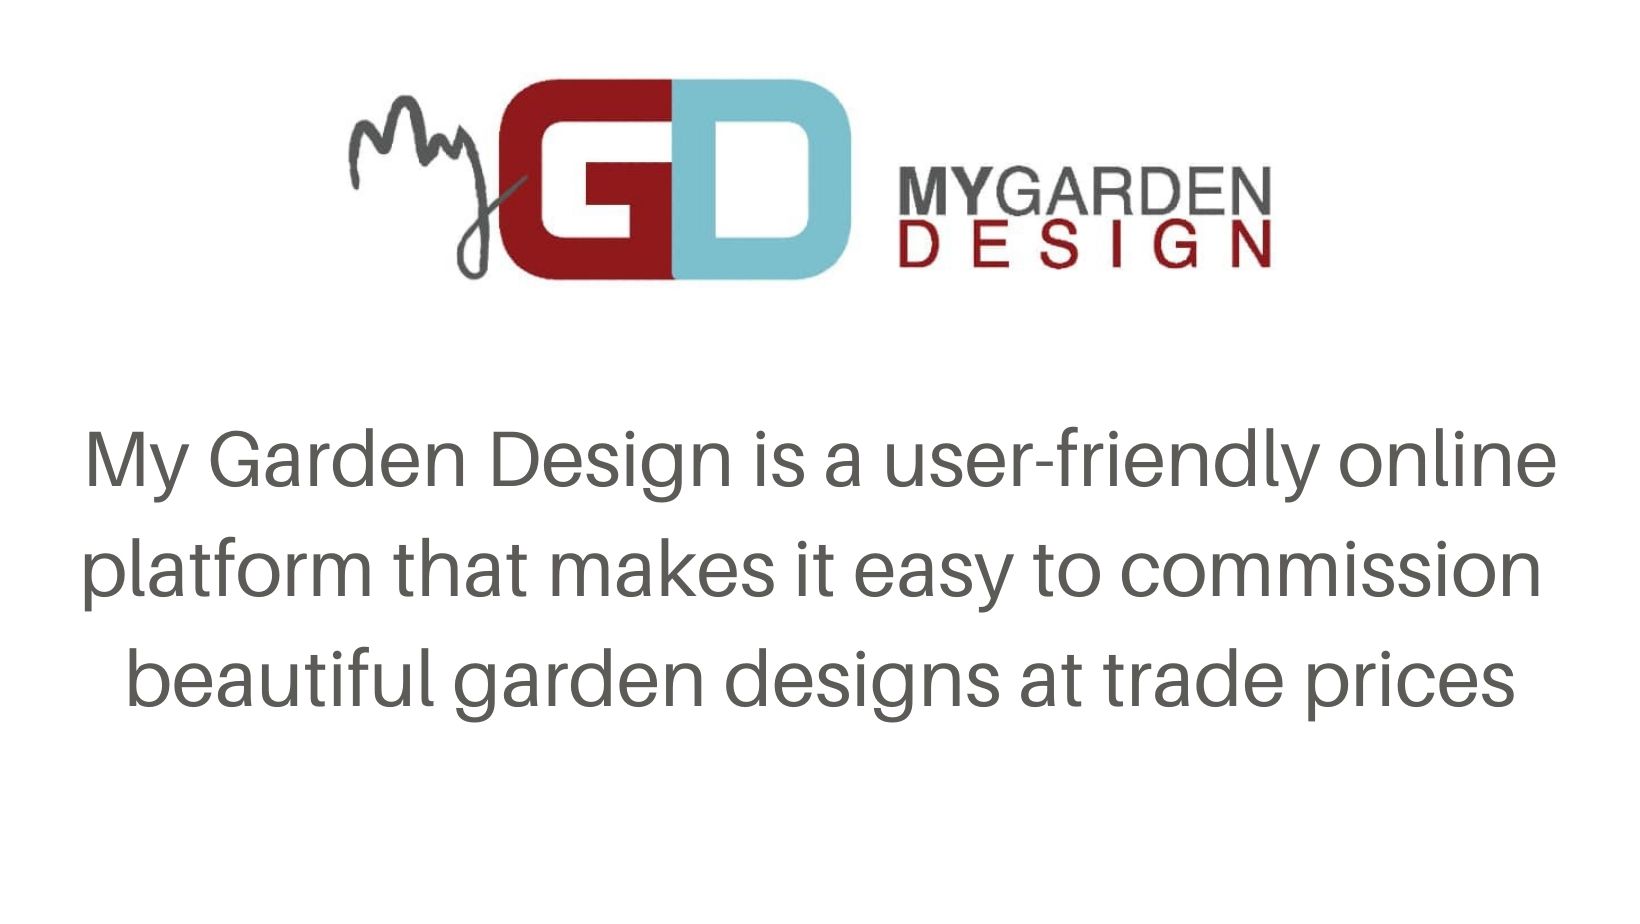 My Garden Design services for landscapers